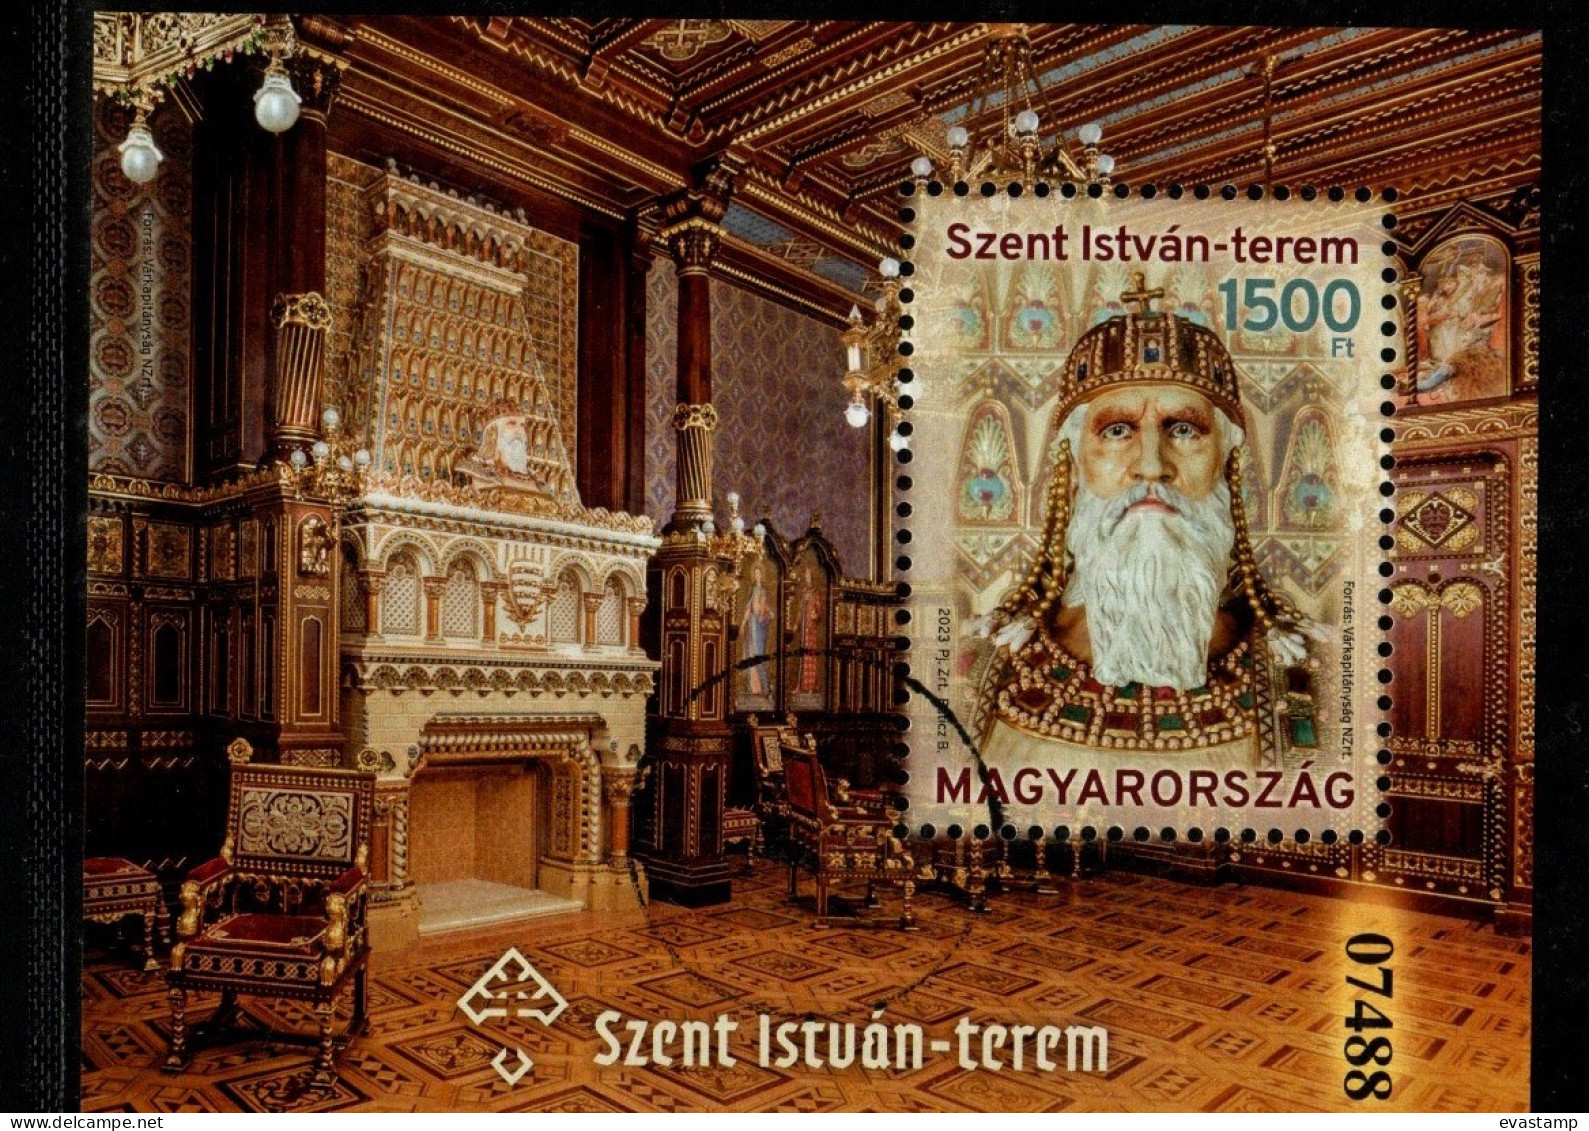 HUNGARY - 2023. Specimen S/S Perforated - Saint Stephen's Hall In Buda Castle MNH!! - Ensayos & Reimpresiones